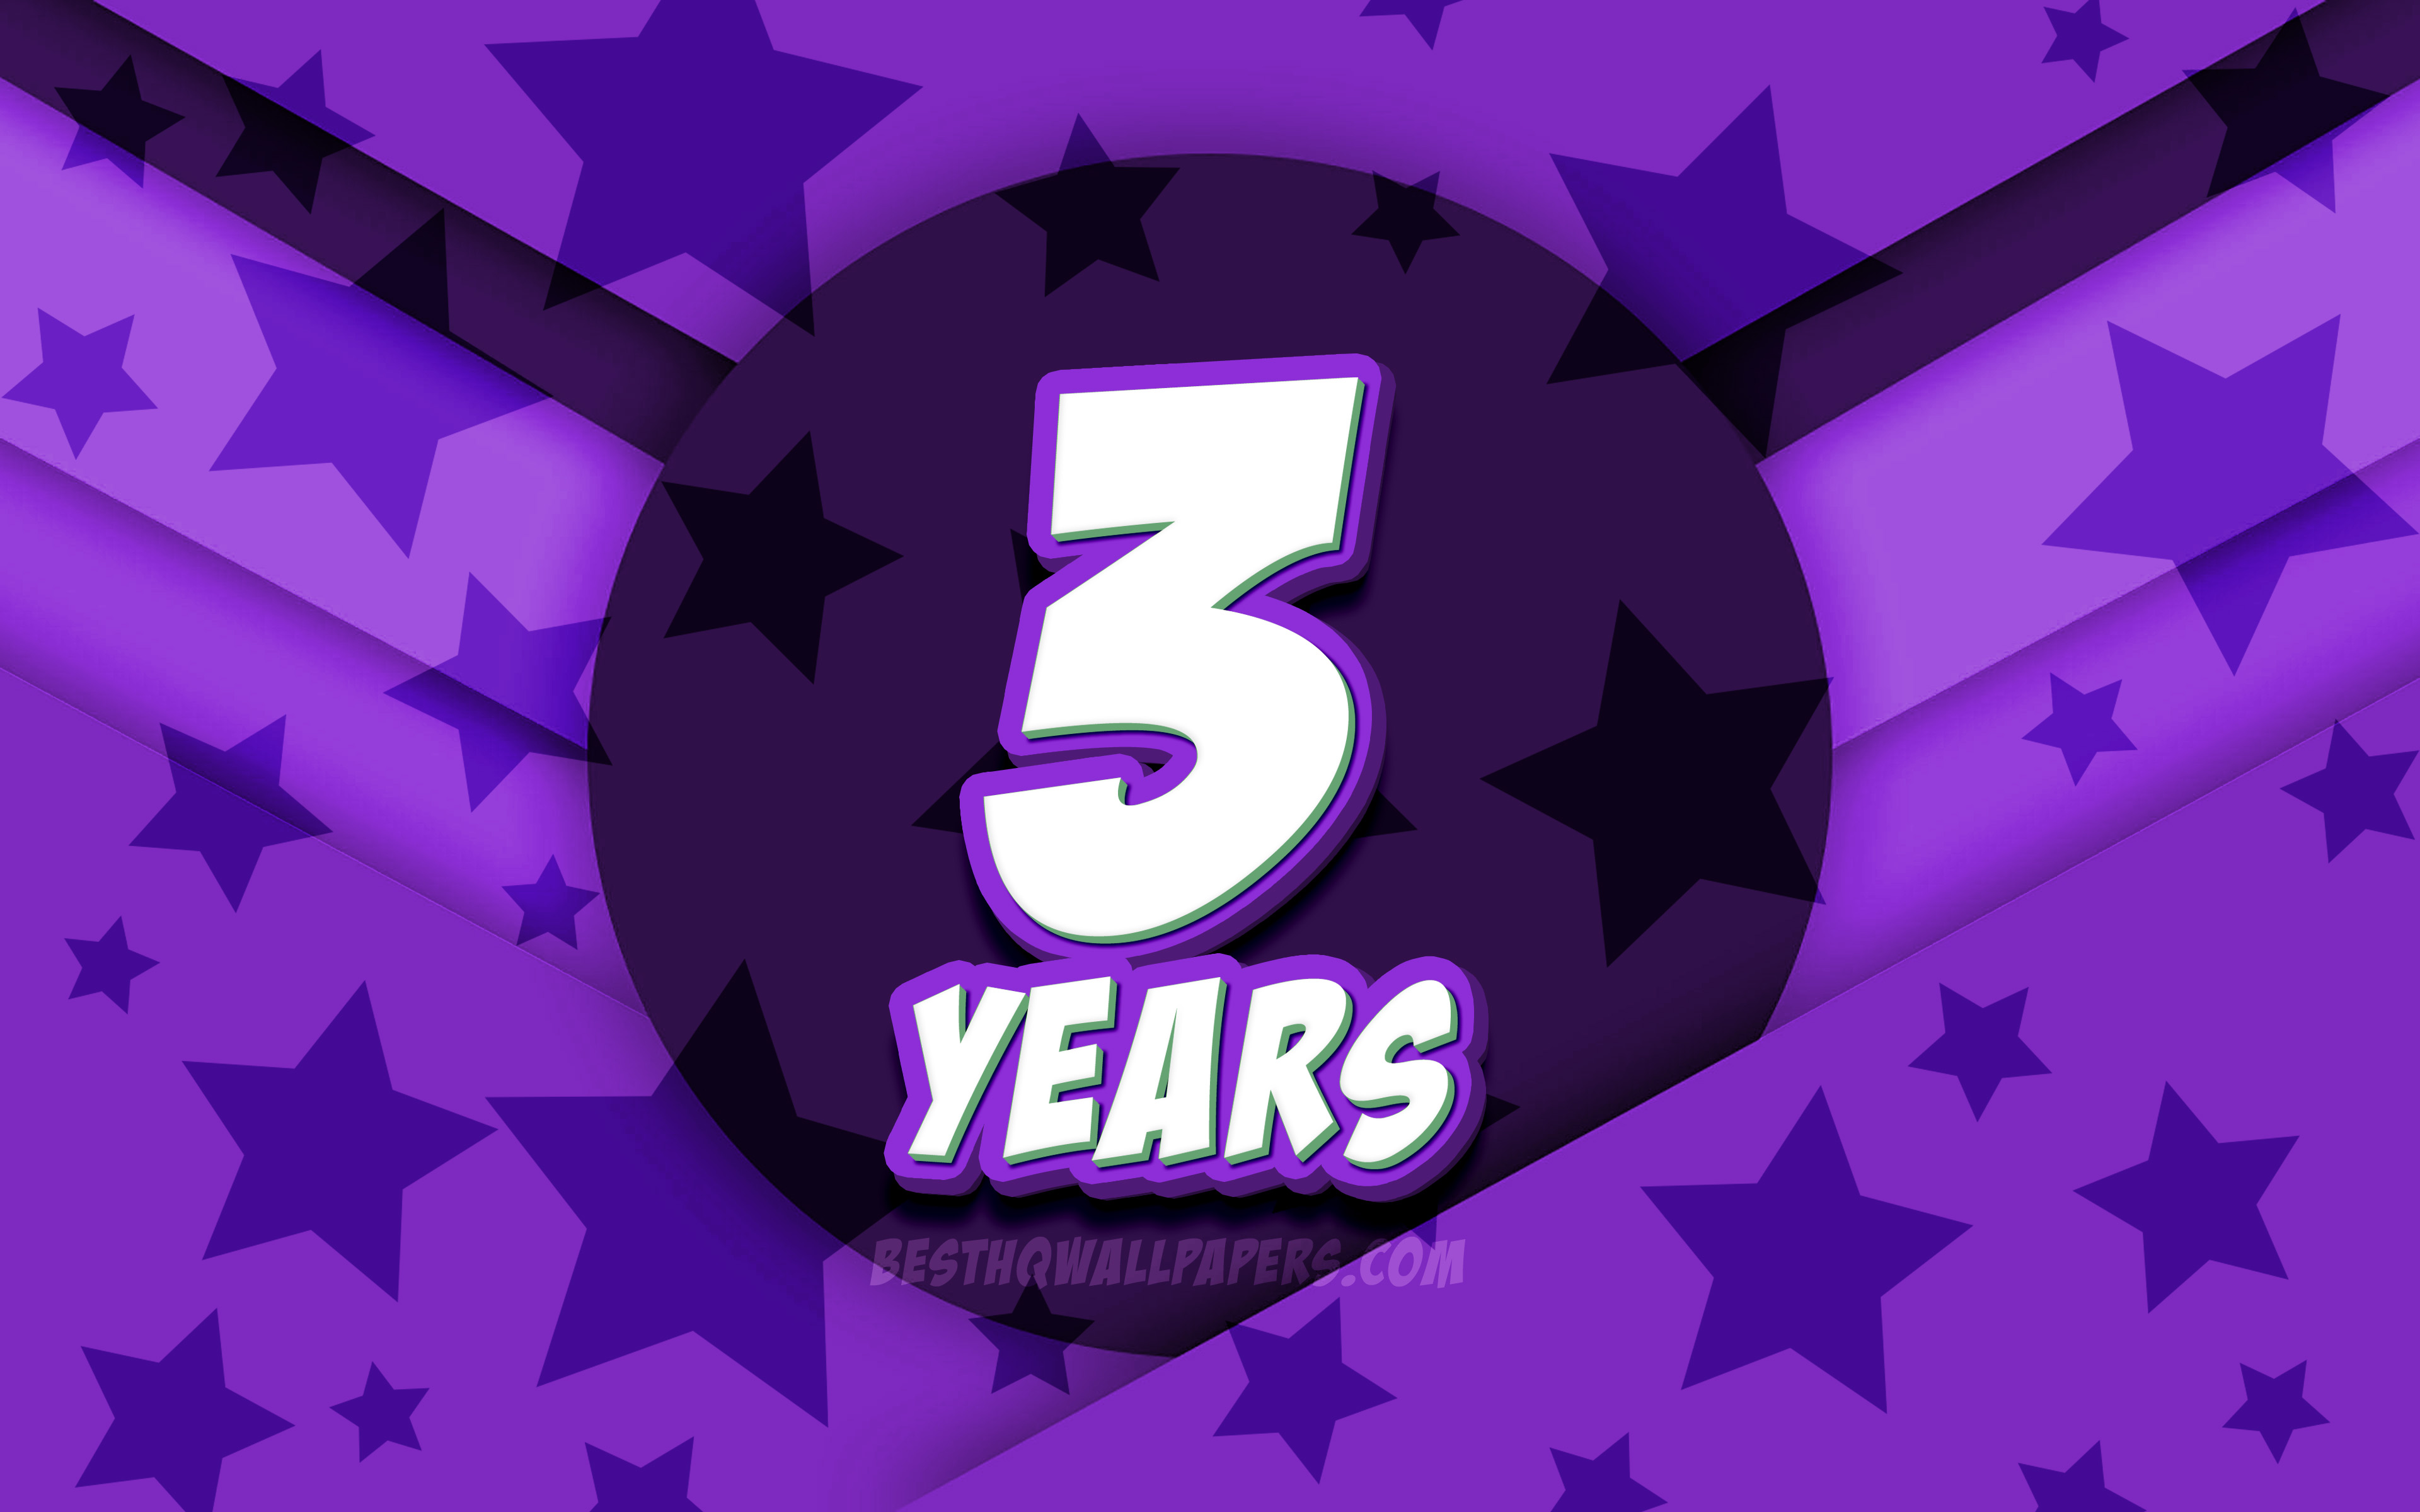 Download wallpaper 4k, Happy 3 Years Birthday, comic 3D letters, Birthday Party, violet stars background, Happy 3rd birthday, 3rd Birthday Party, artwork, Birthday concept, 3rd Birthday for desktop with resolution 3840x2400. High